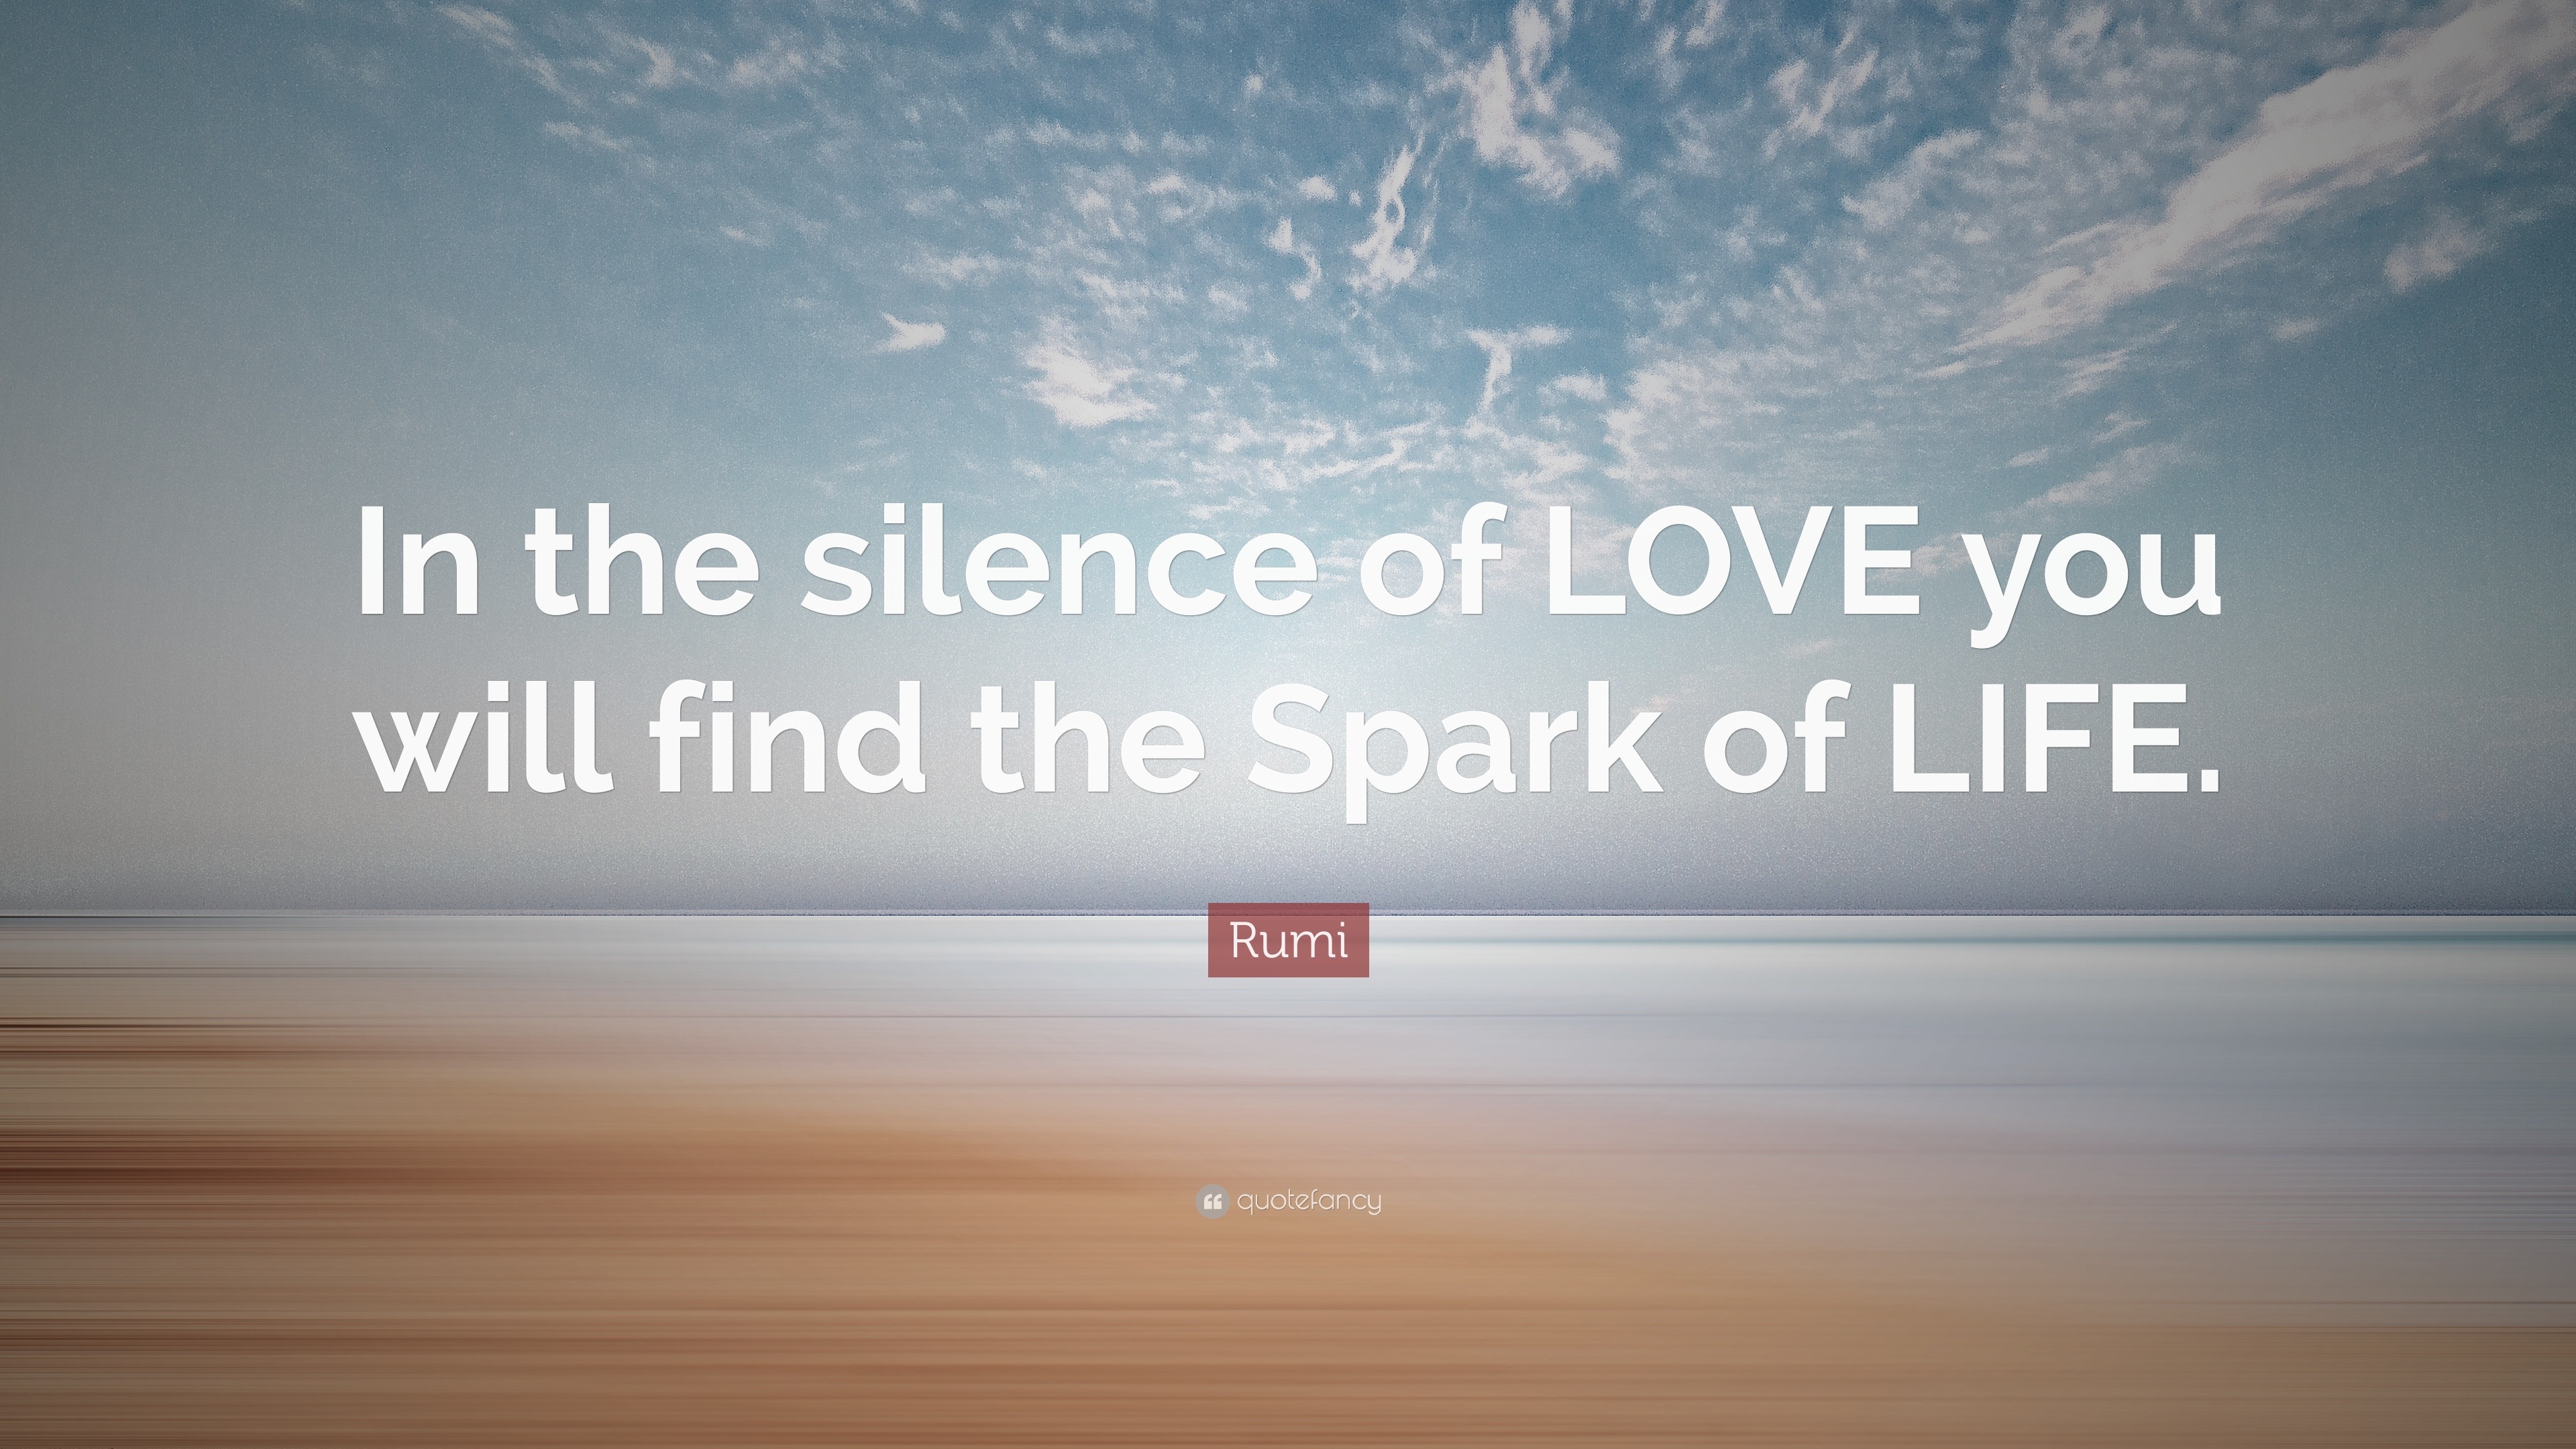 Rumi Quote “In the silence of LOVE you will find the Spark of LIFE